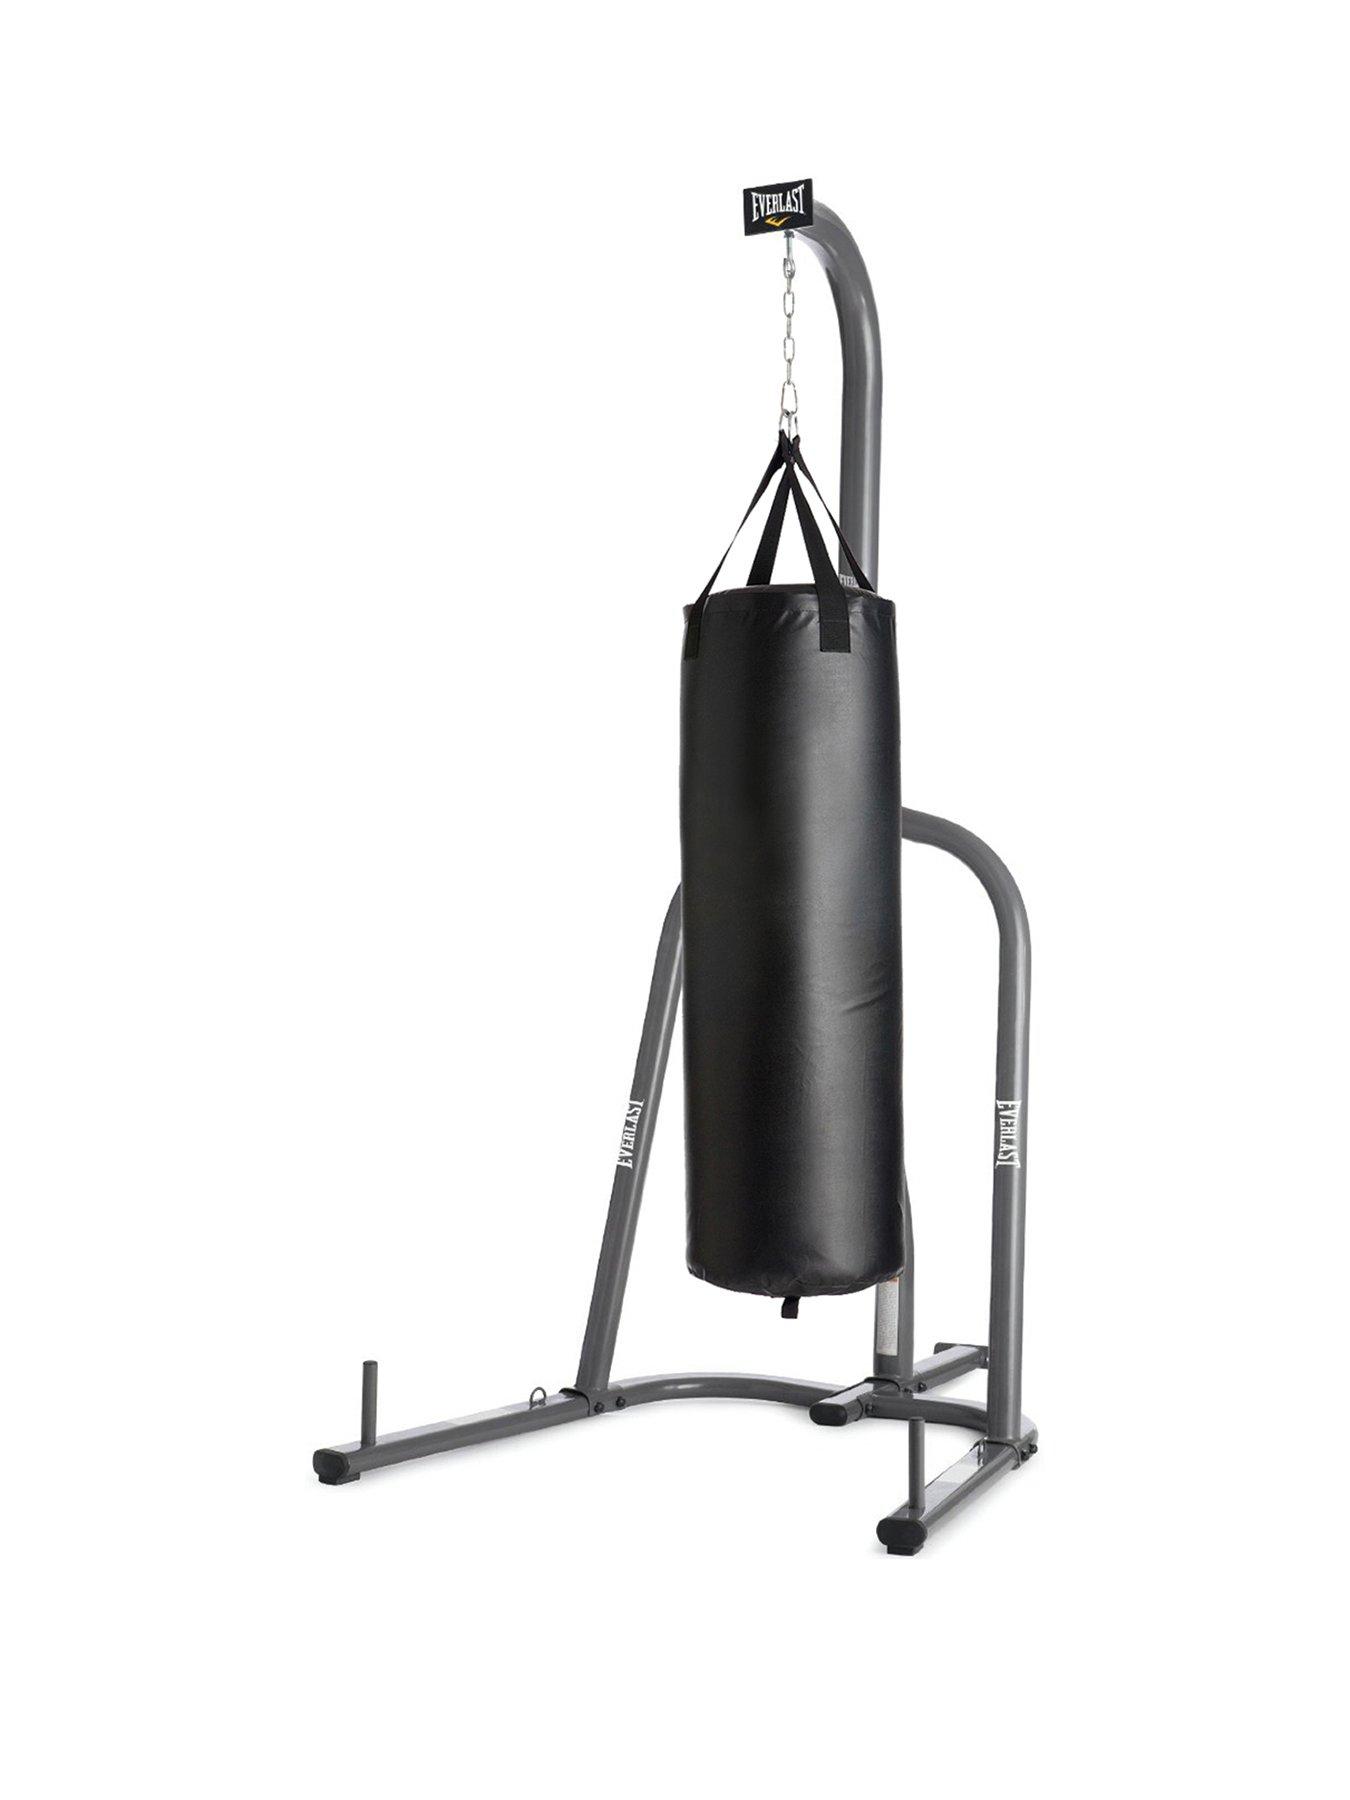 Everlast Heavy Punch Bag Stand and Bag | www.semadata.org